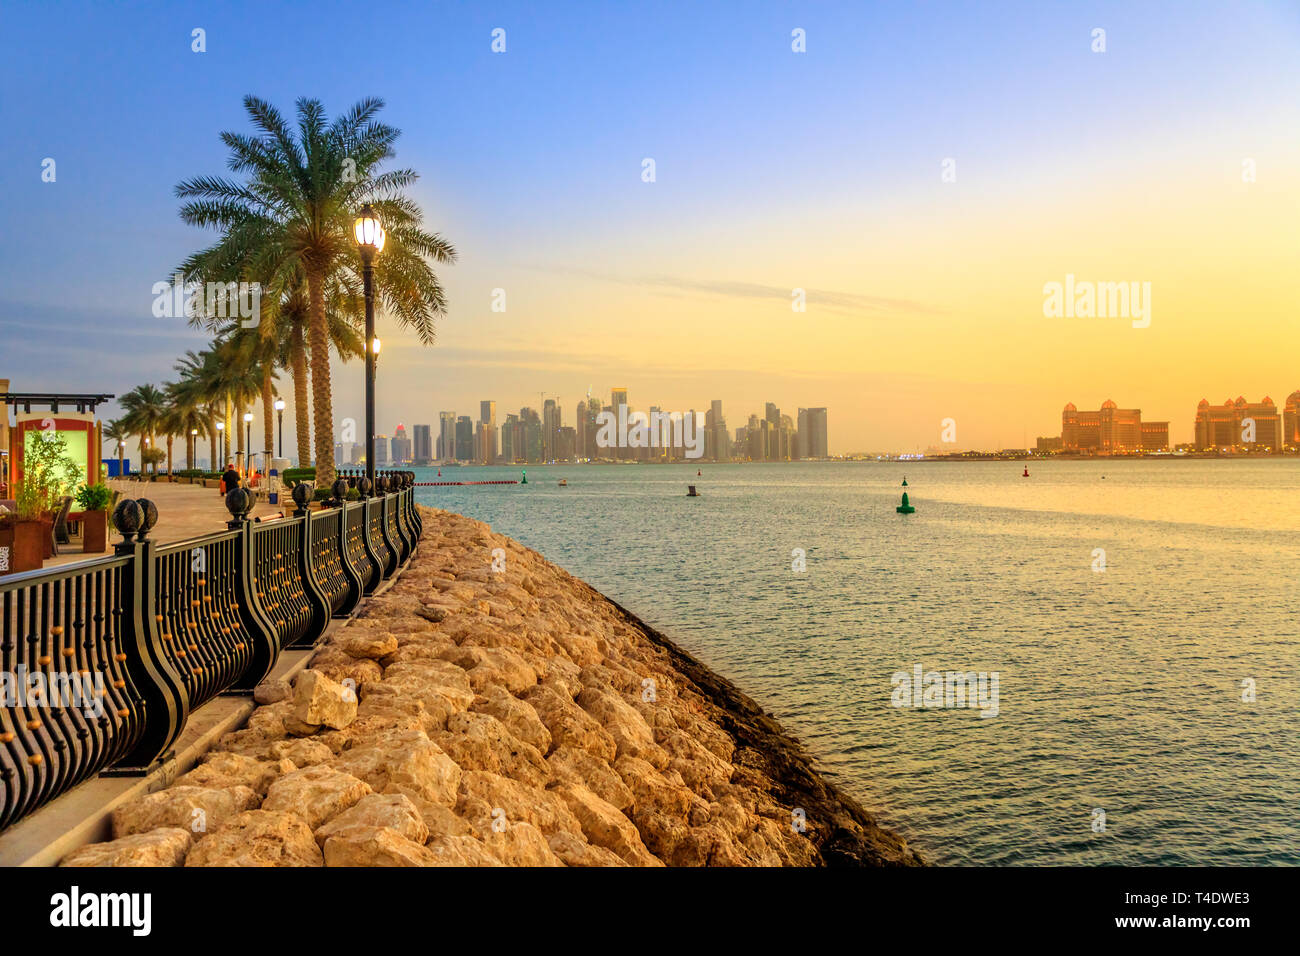 Palm trees along marina walkway in Porto Arabia at the Pearl-Qatar, Doha, with skyscrapers of West Bay skyline at sunset sky. Scenic sunset landscape Stock Photo